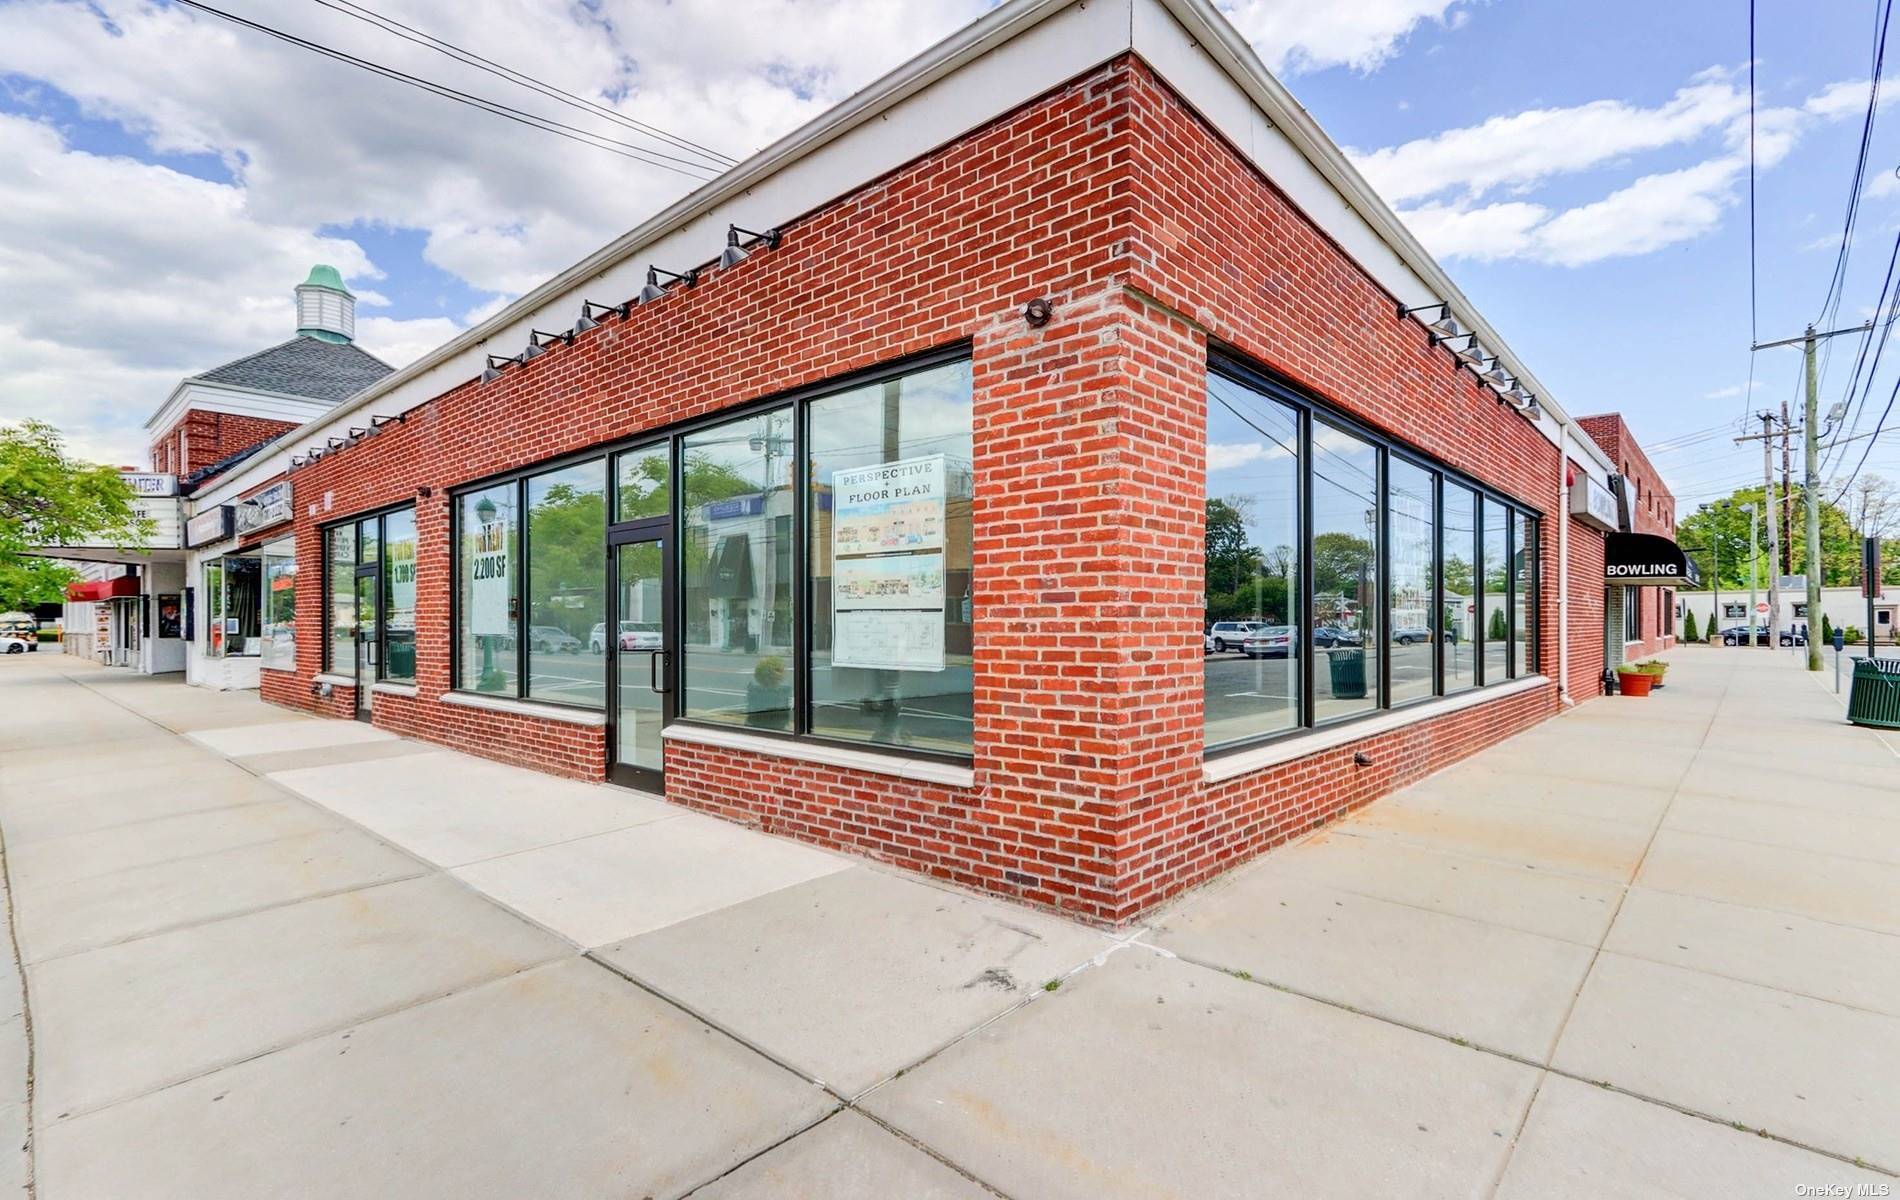 Impress your clients with this well maintained office space in the heart of Malverne.